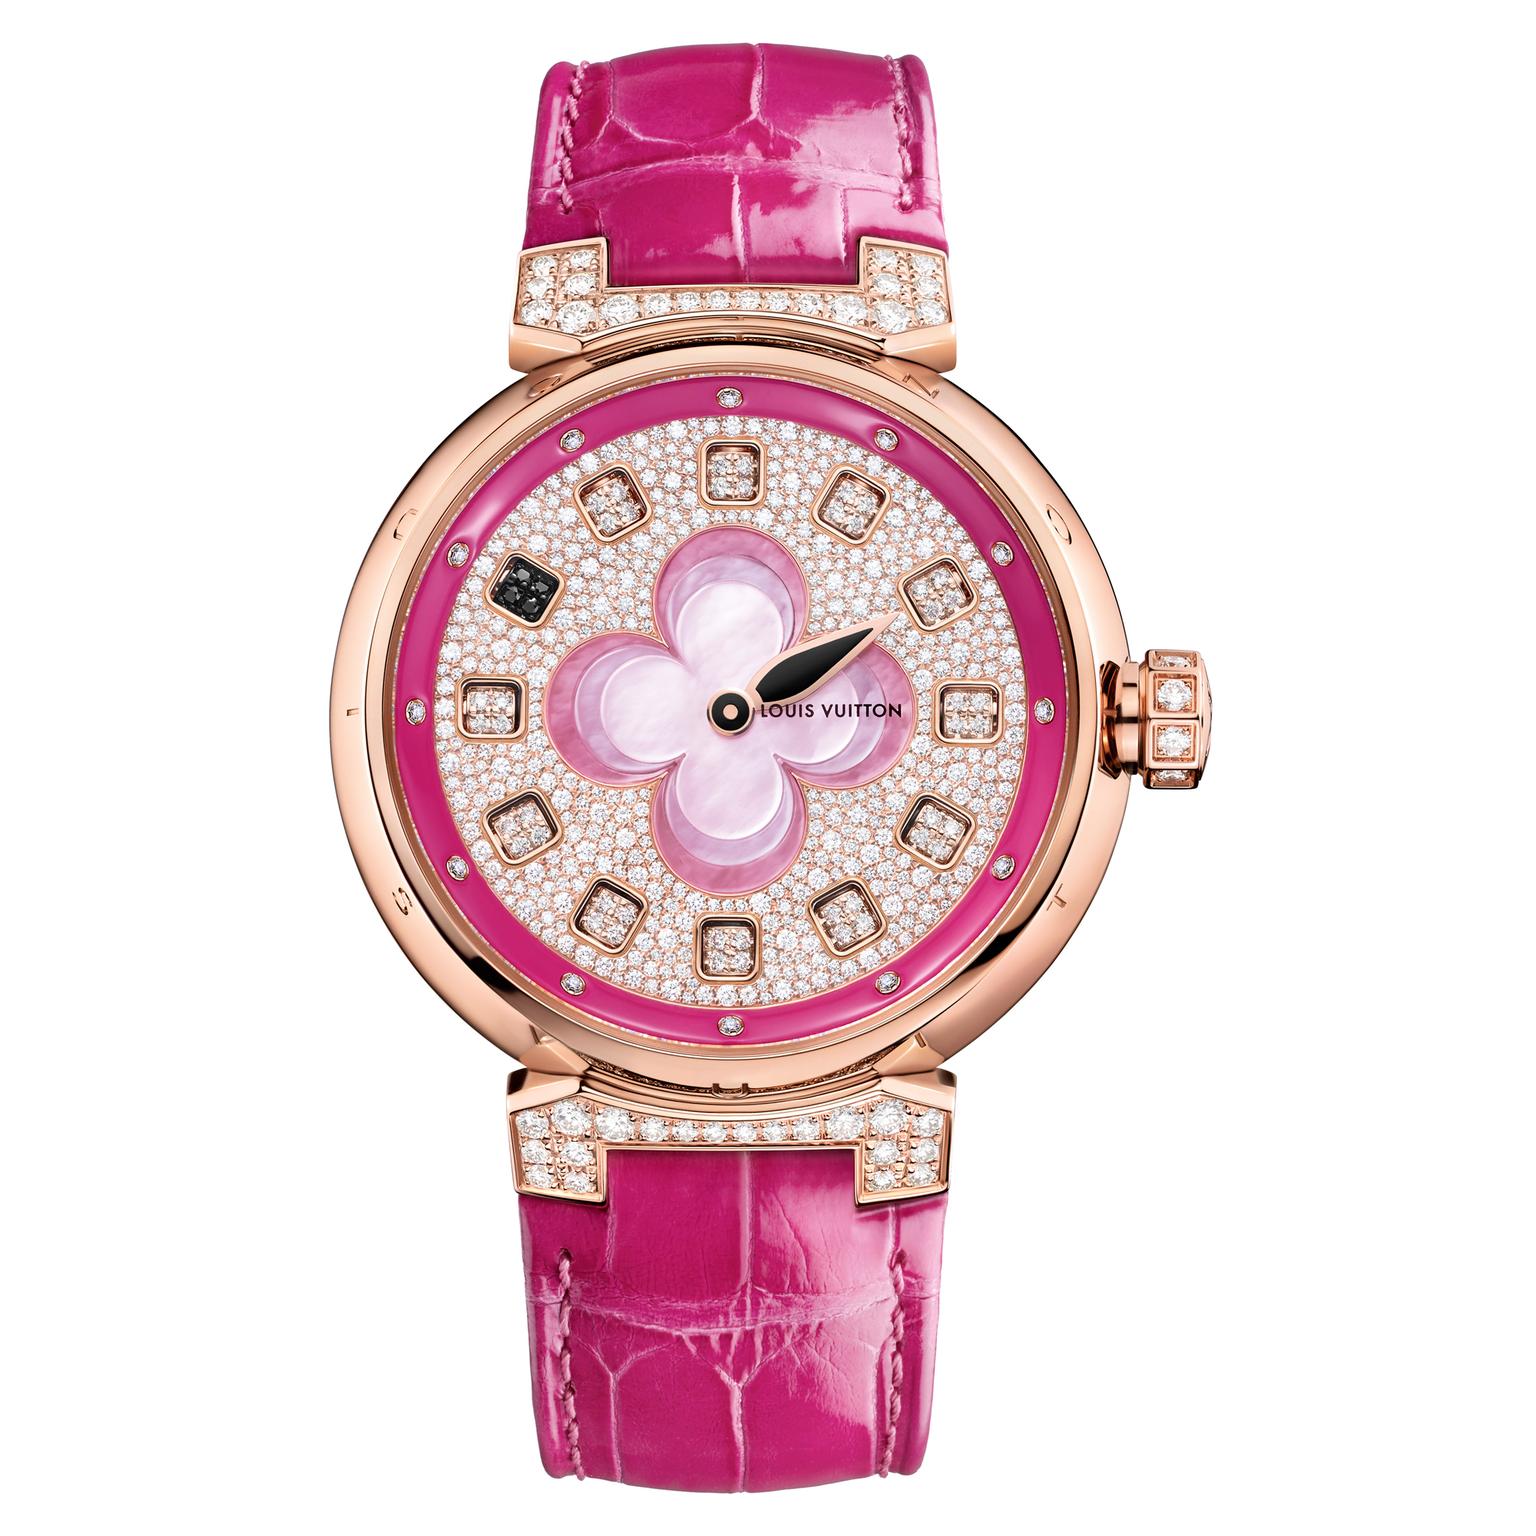 New Louis Vuitton jewellery and watches added to the Blossom collection